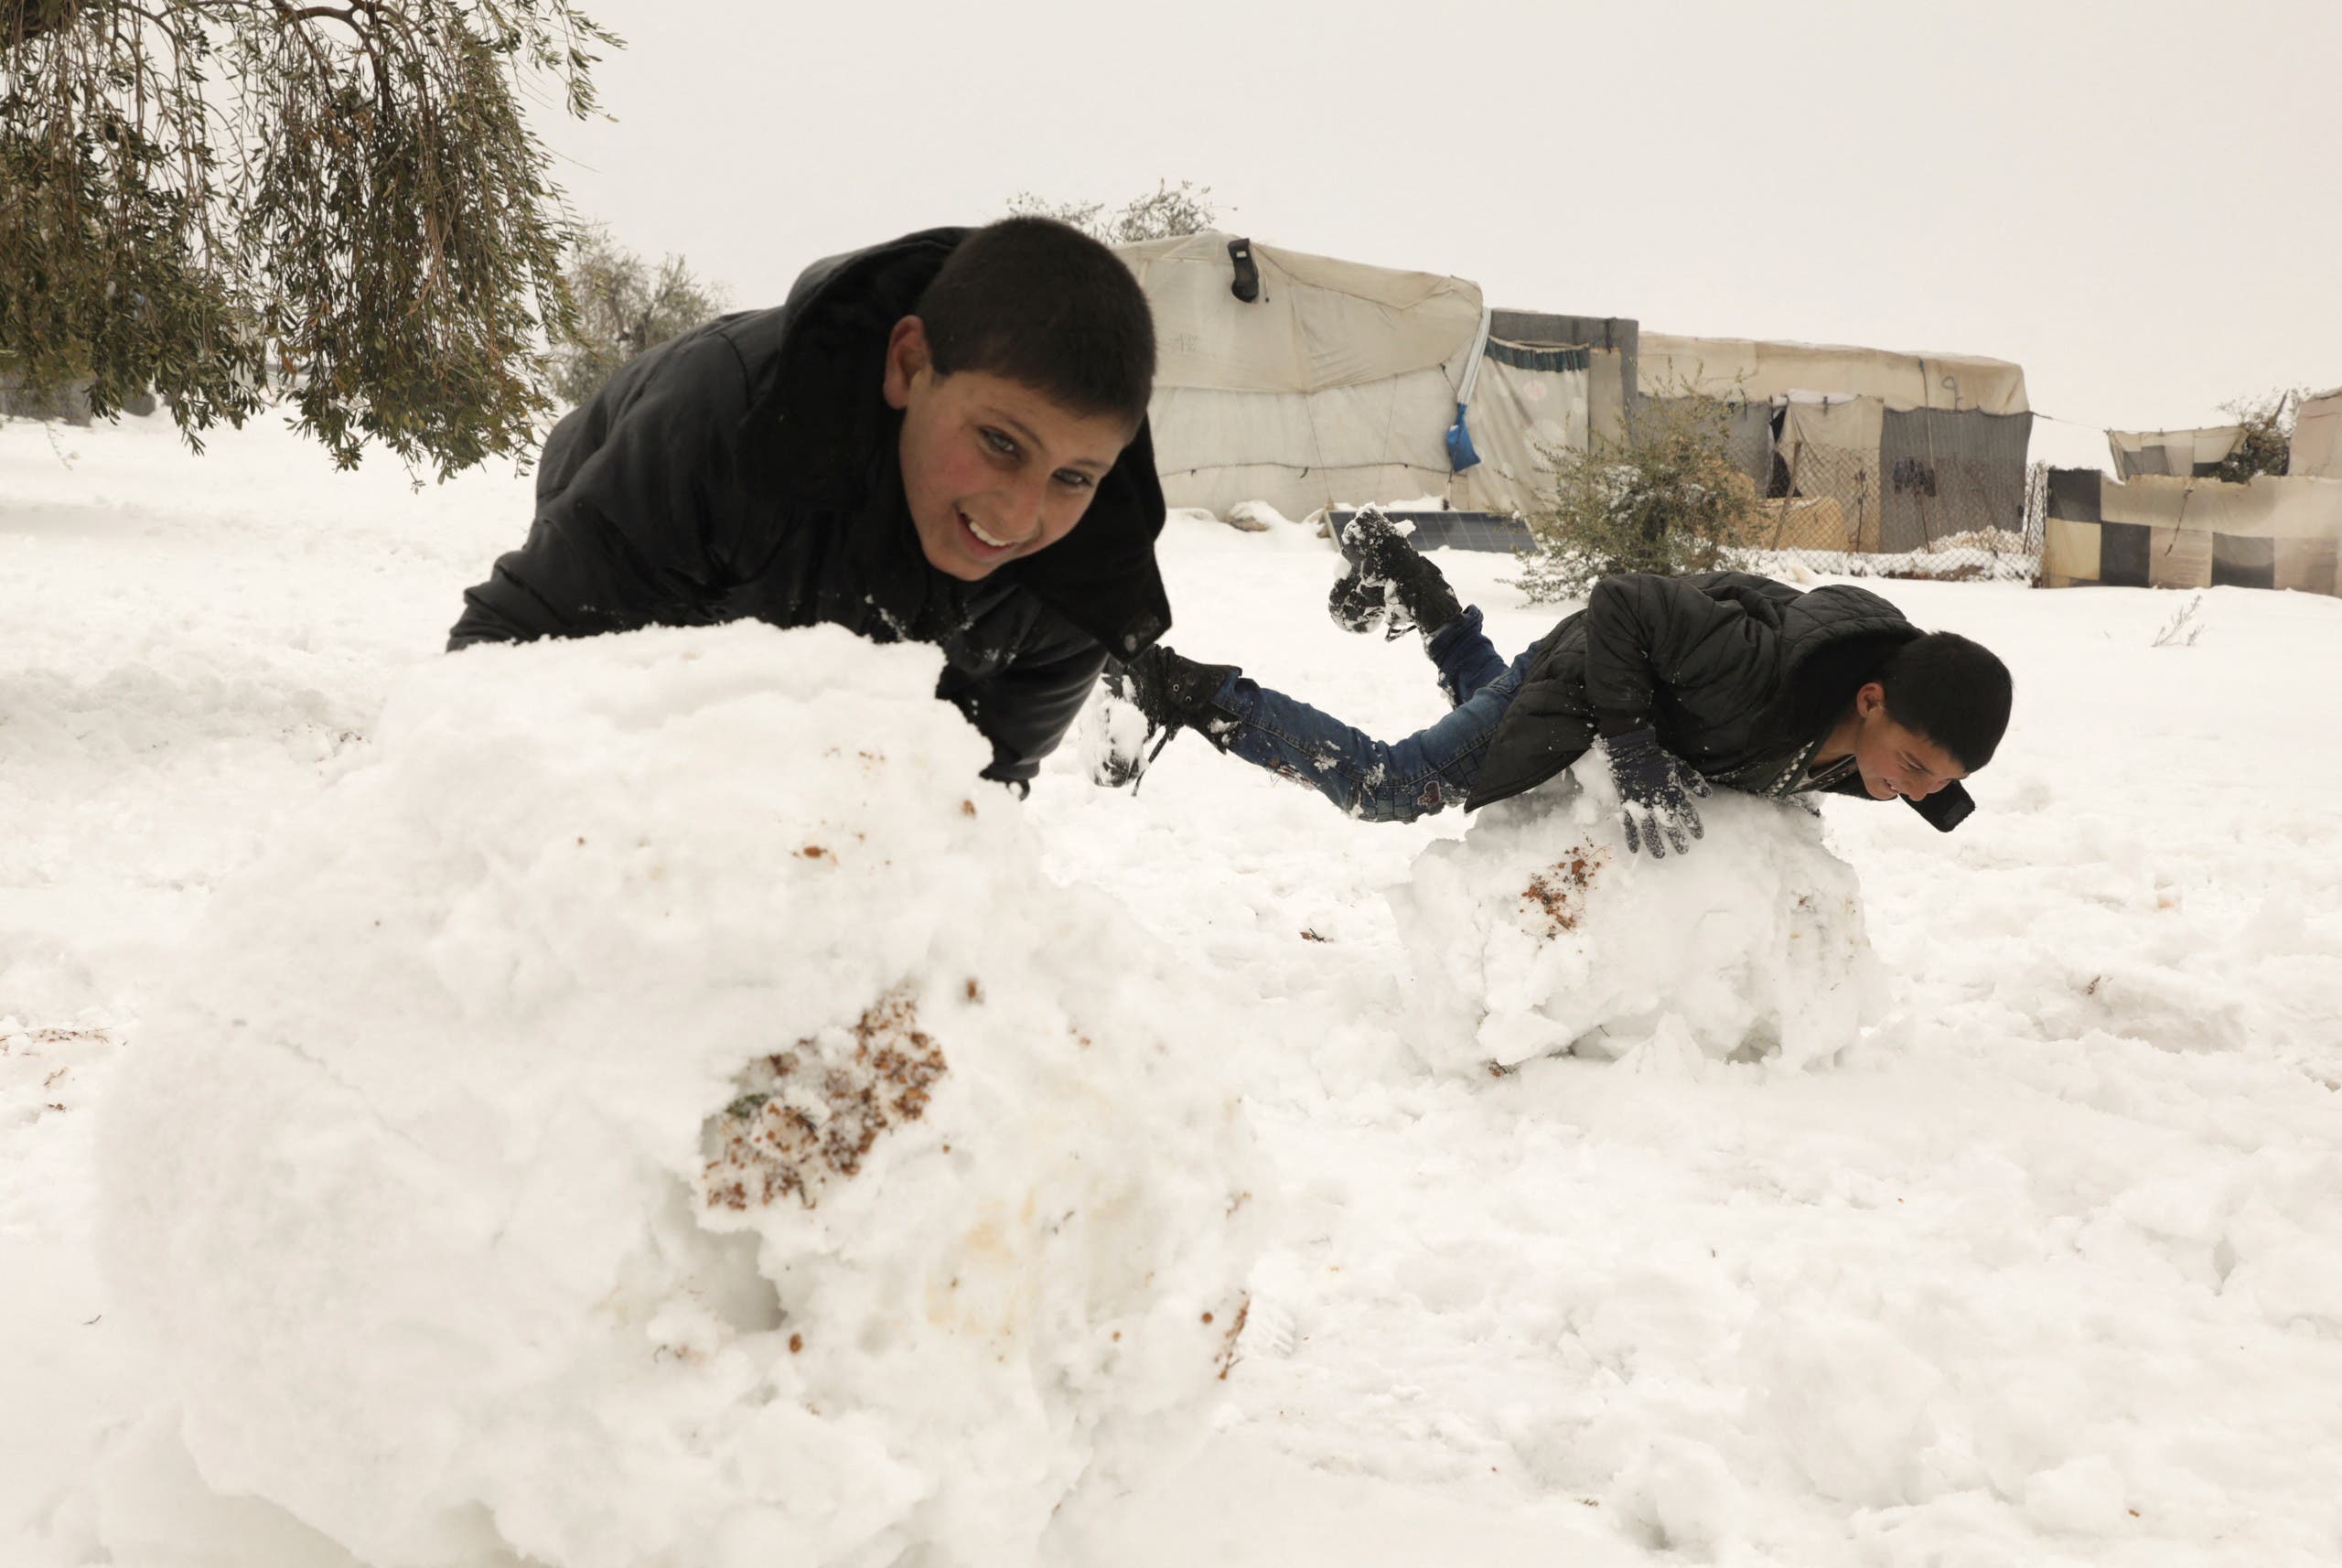 Internally displaced boys play together in the snow at a camp in Aleppo countryside, Syria, January 23, 2022. (Reuters)